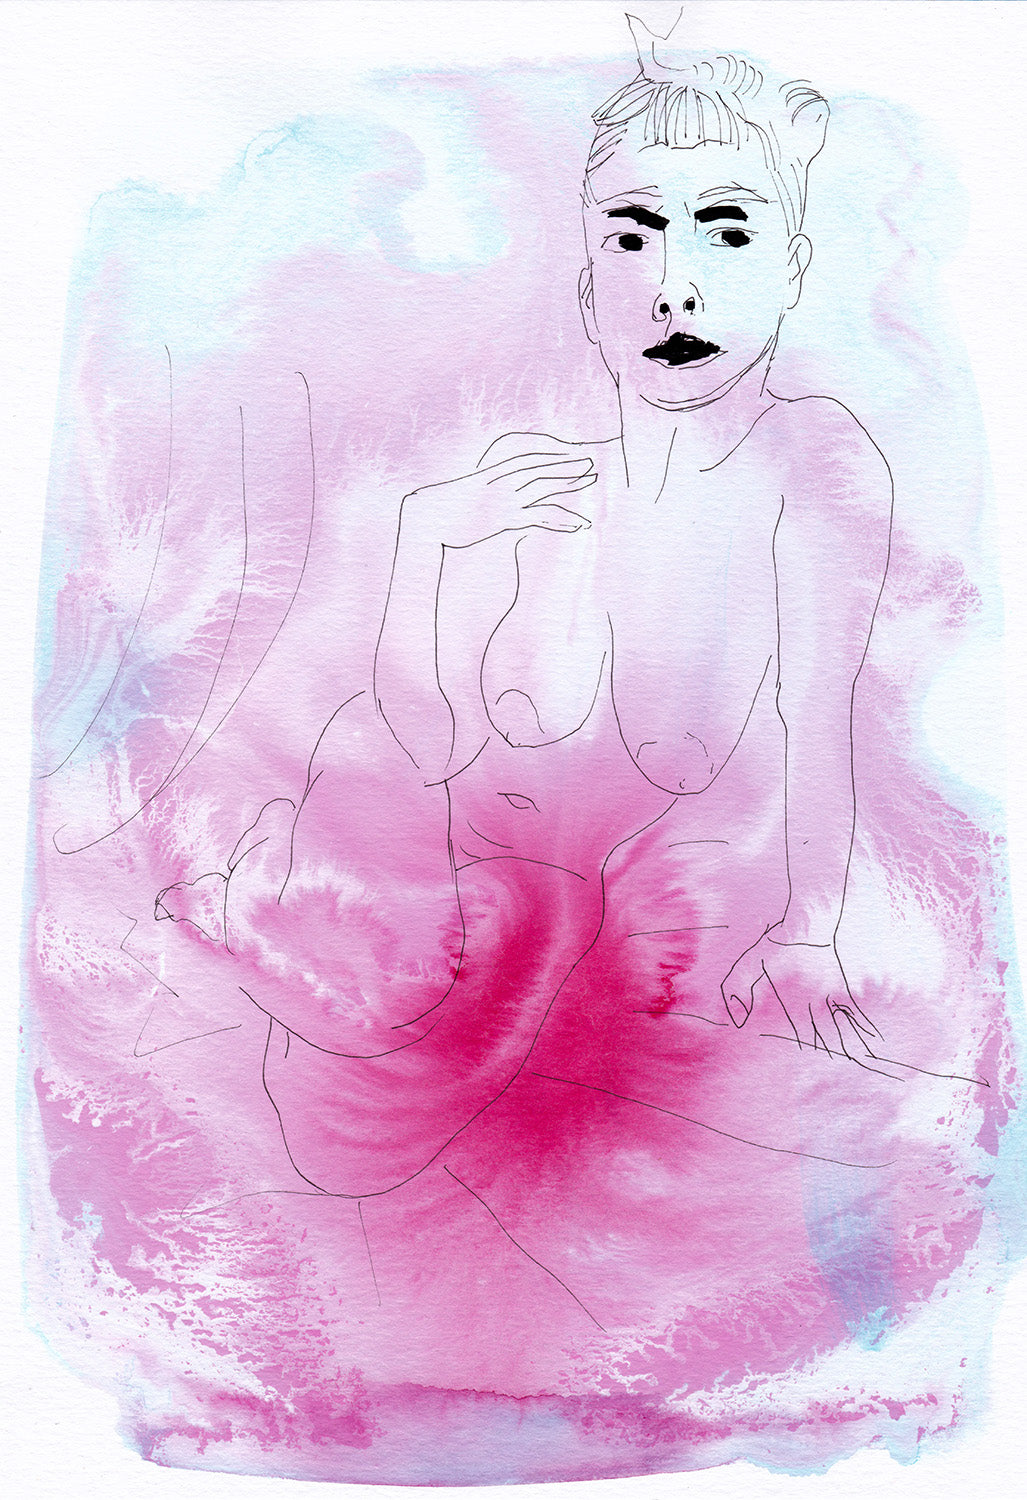 Line drawing of woman on pink swirls.